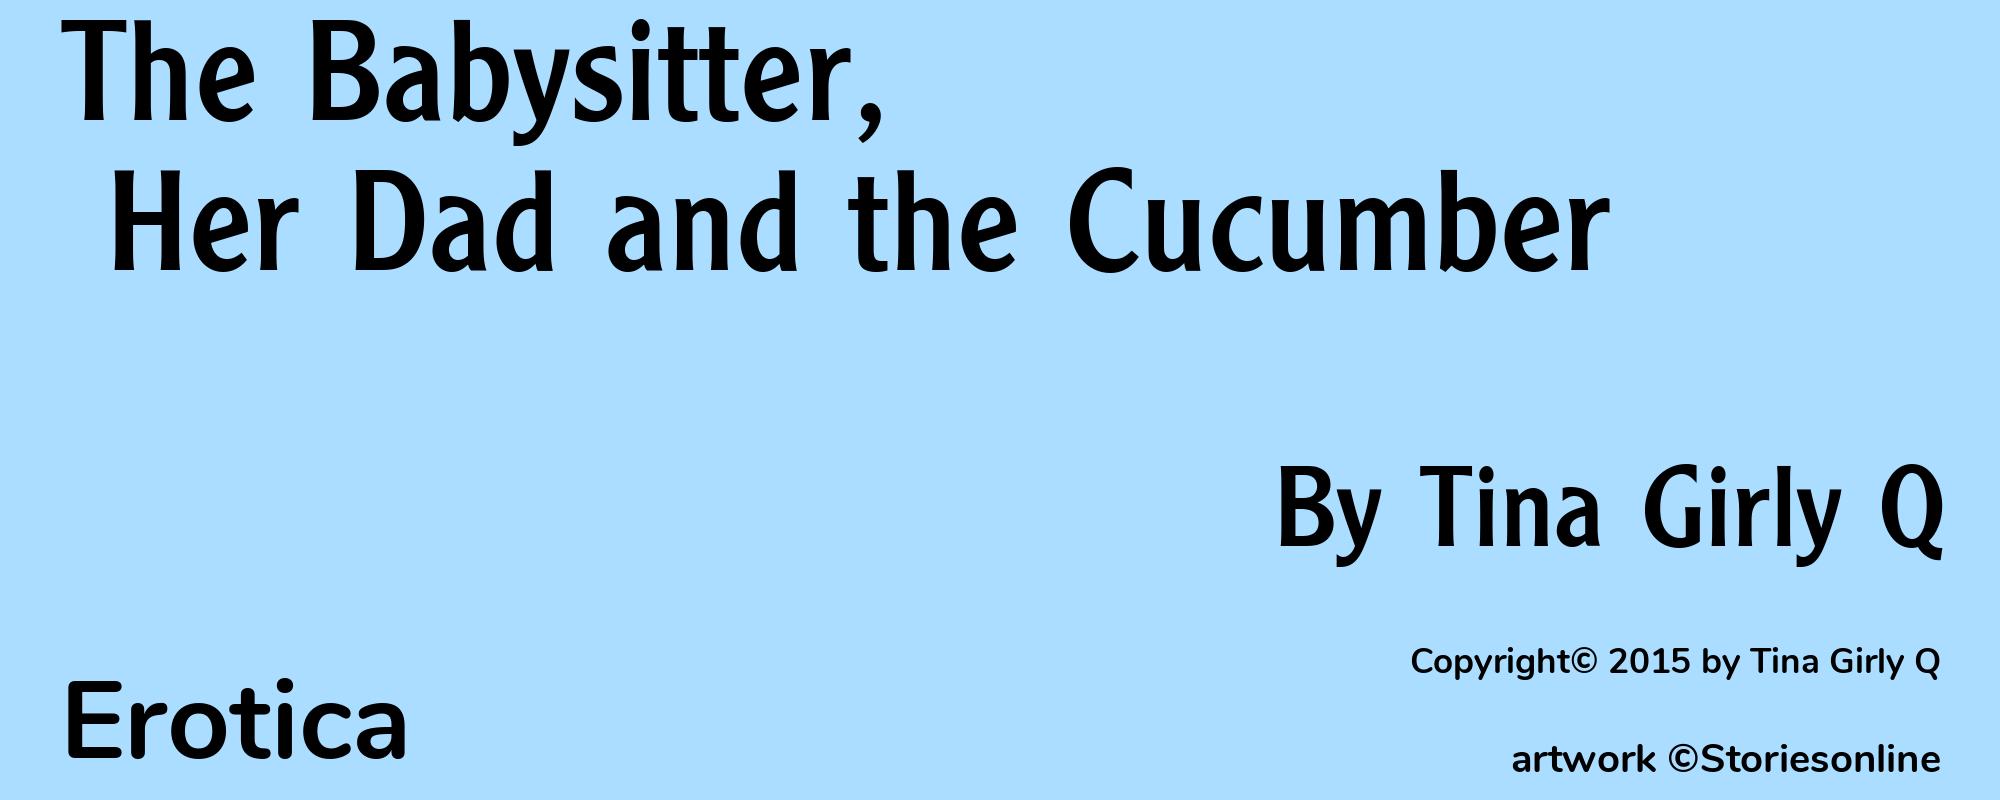 The Babysitter, Her Dad and the Cucumber - Cover